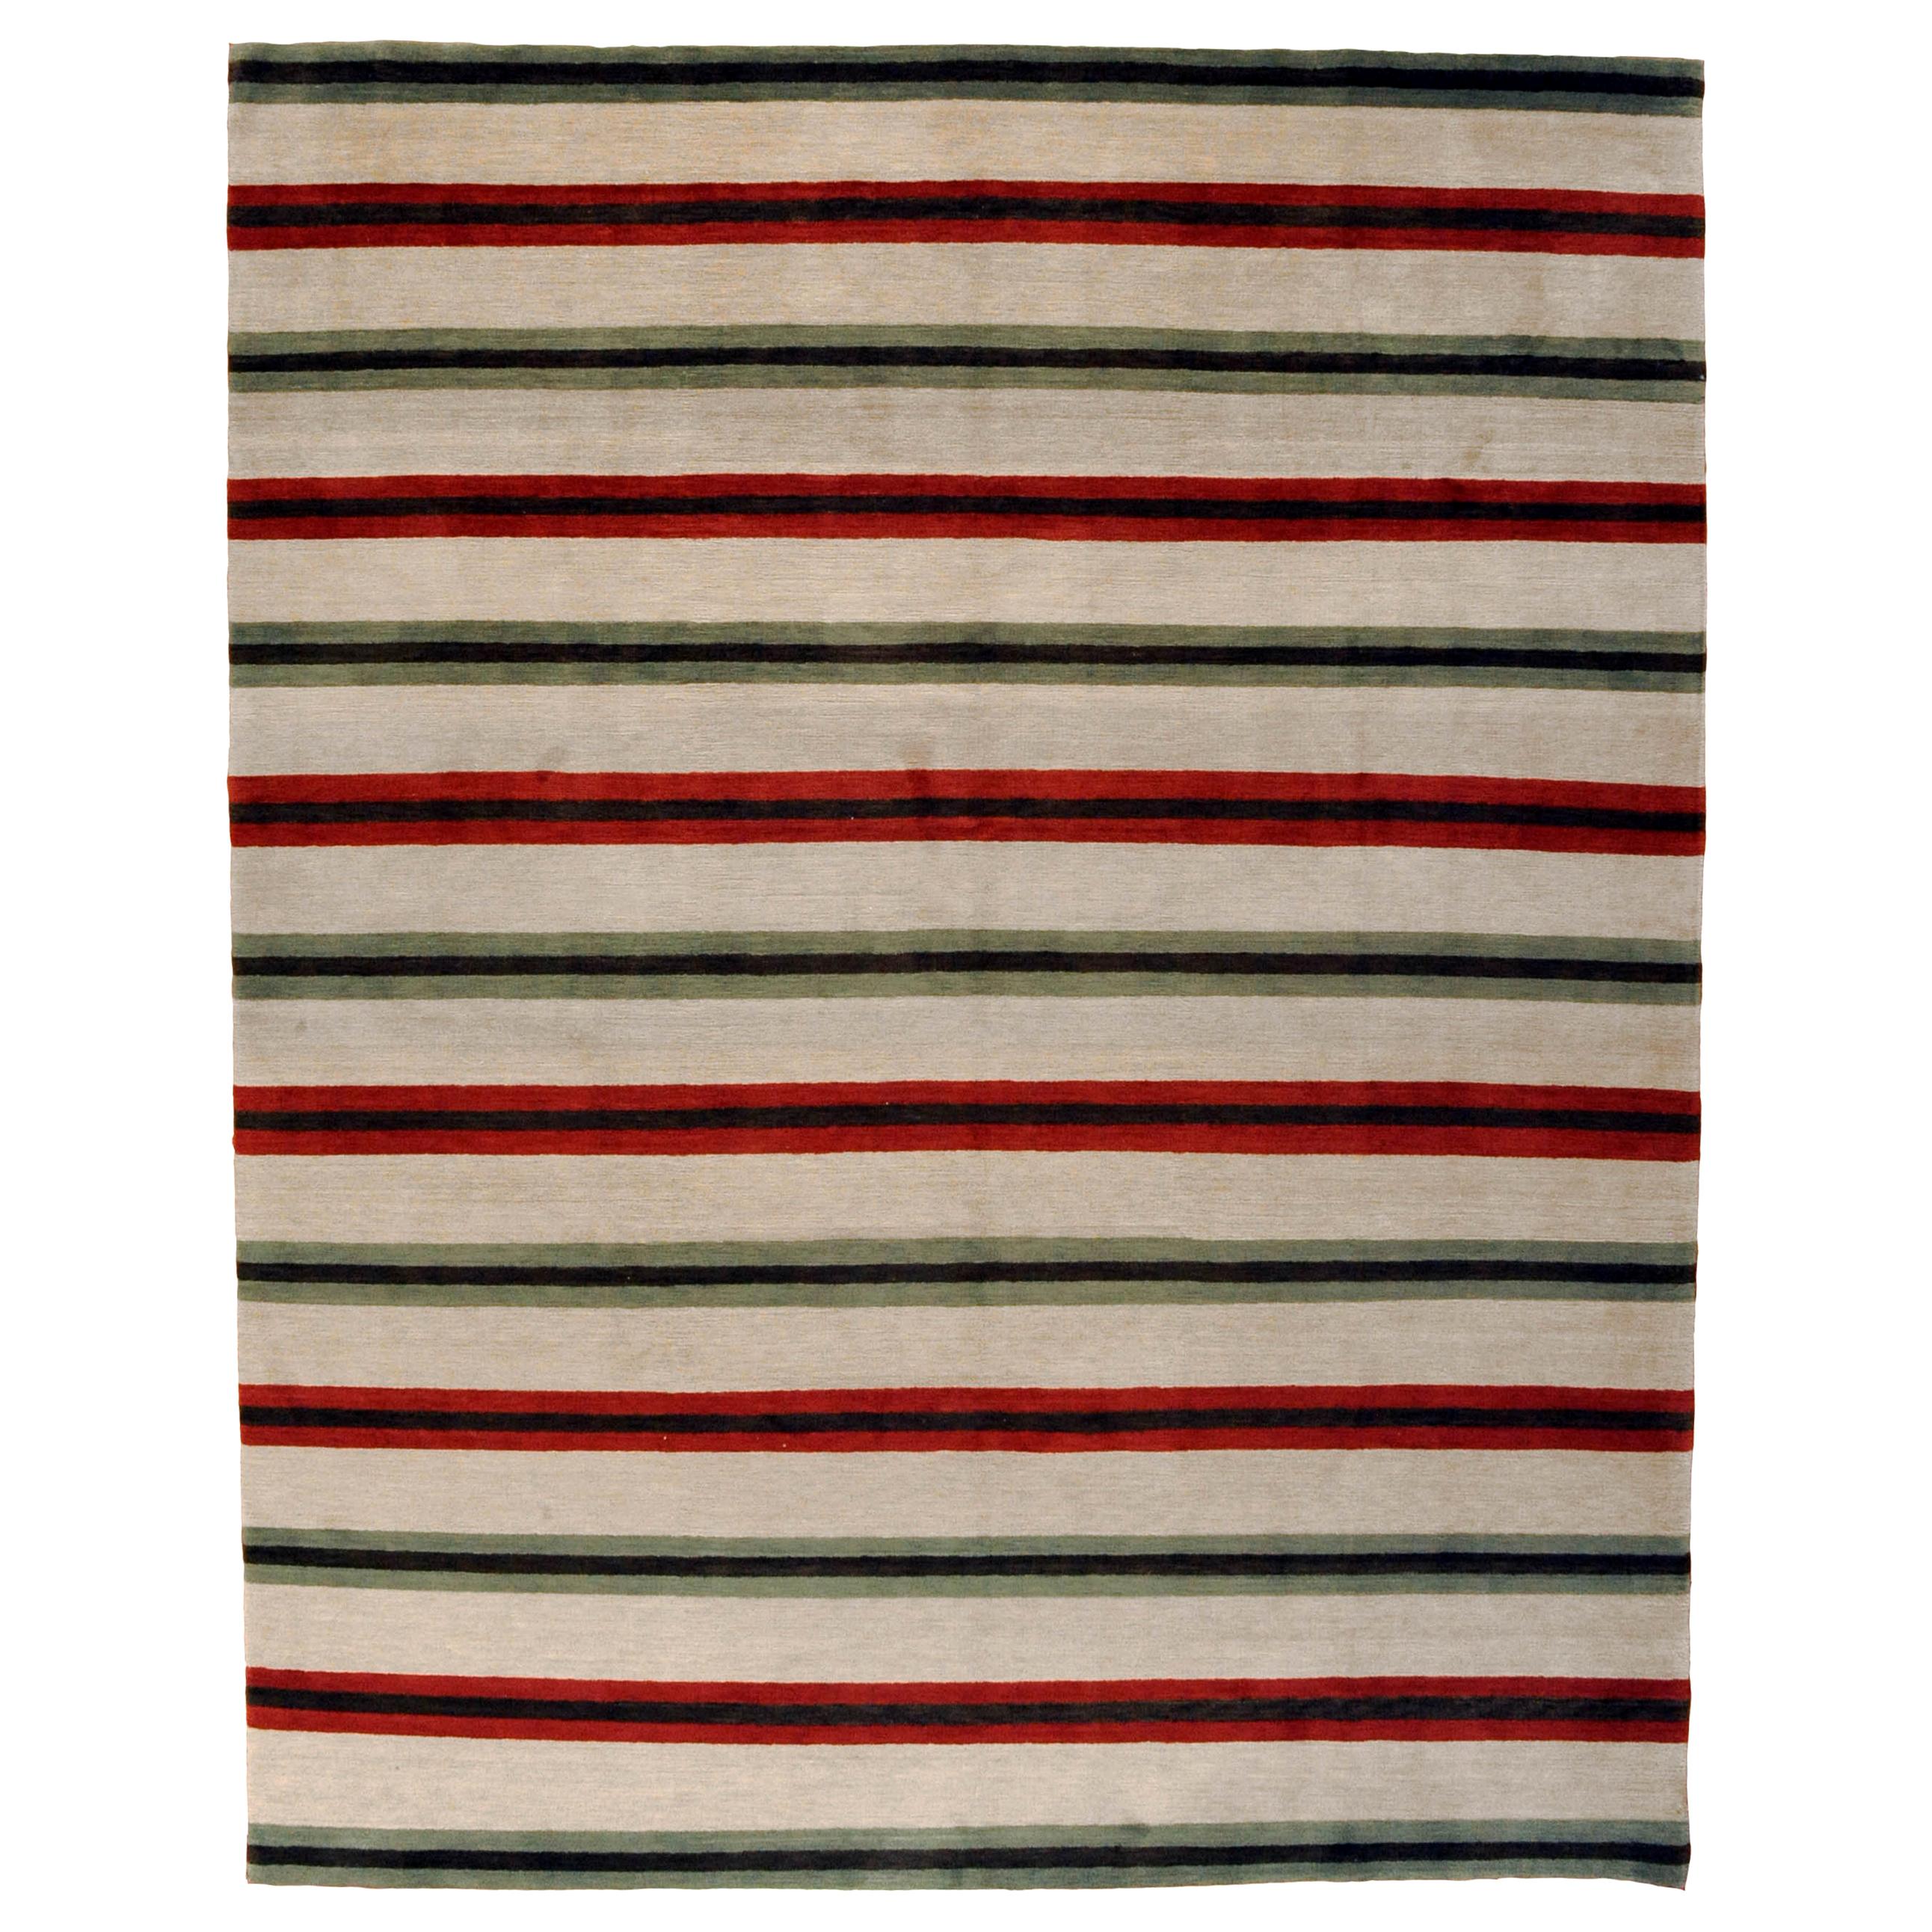 Red Teal And Beige Stripe Area Rug For, Teal And Red Area Rug